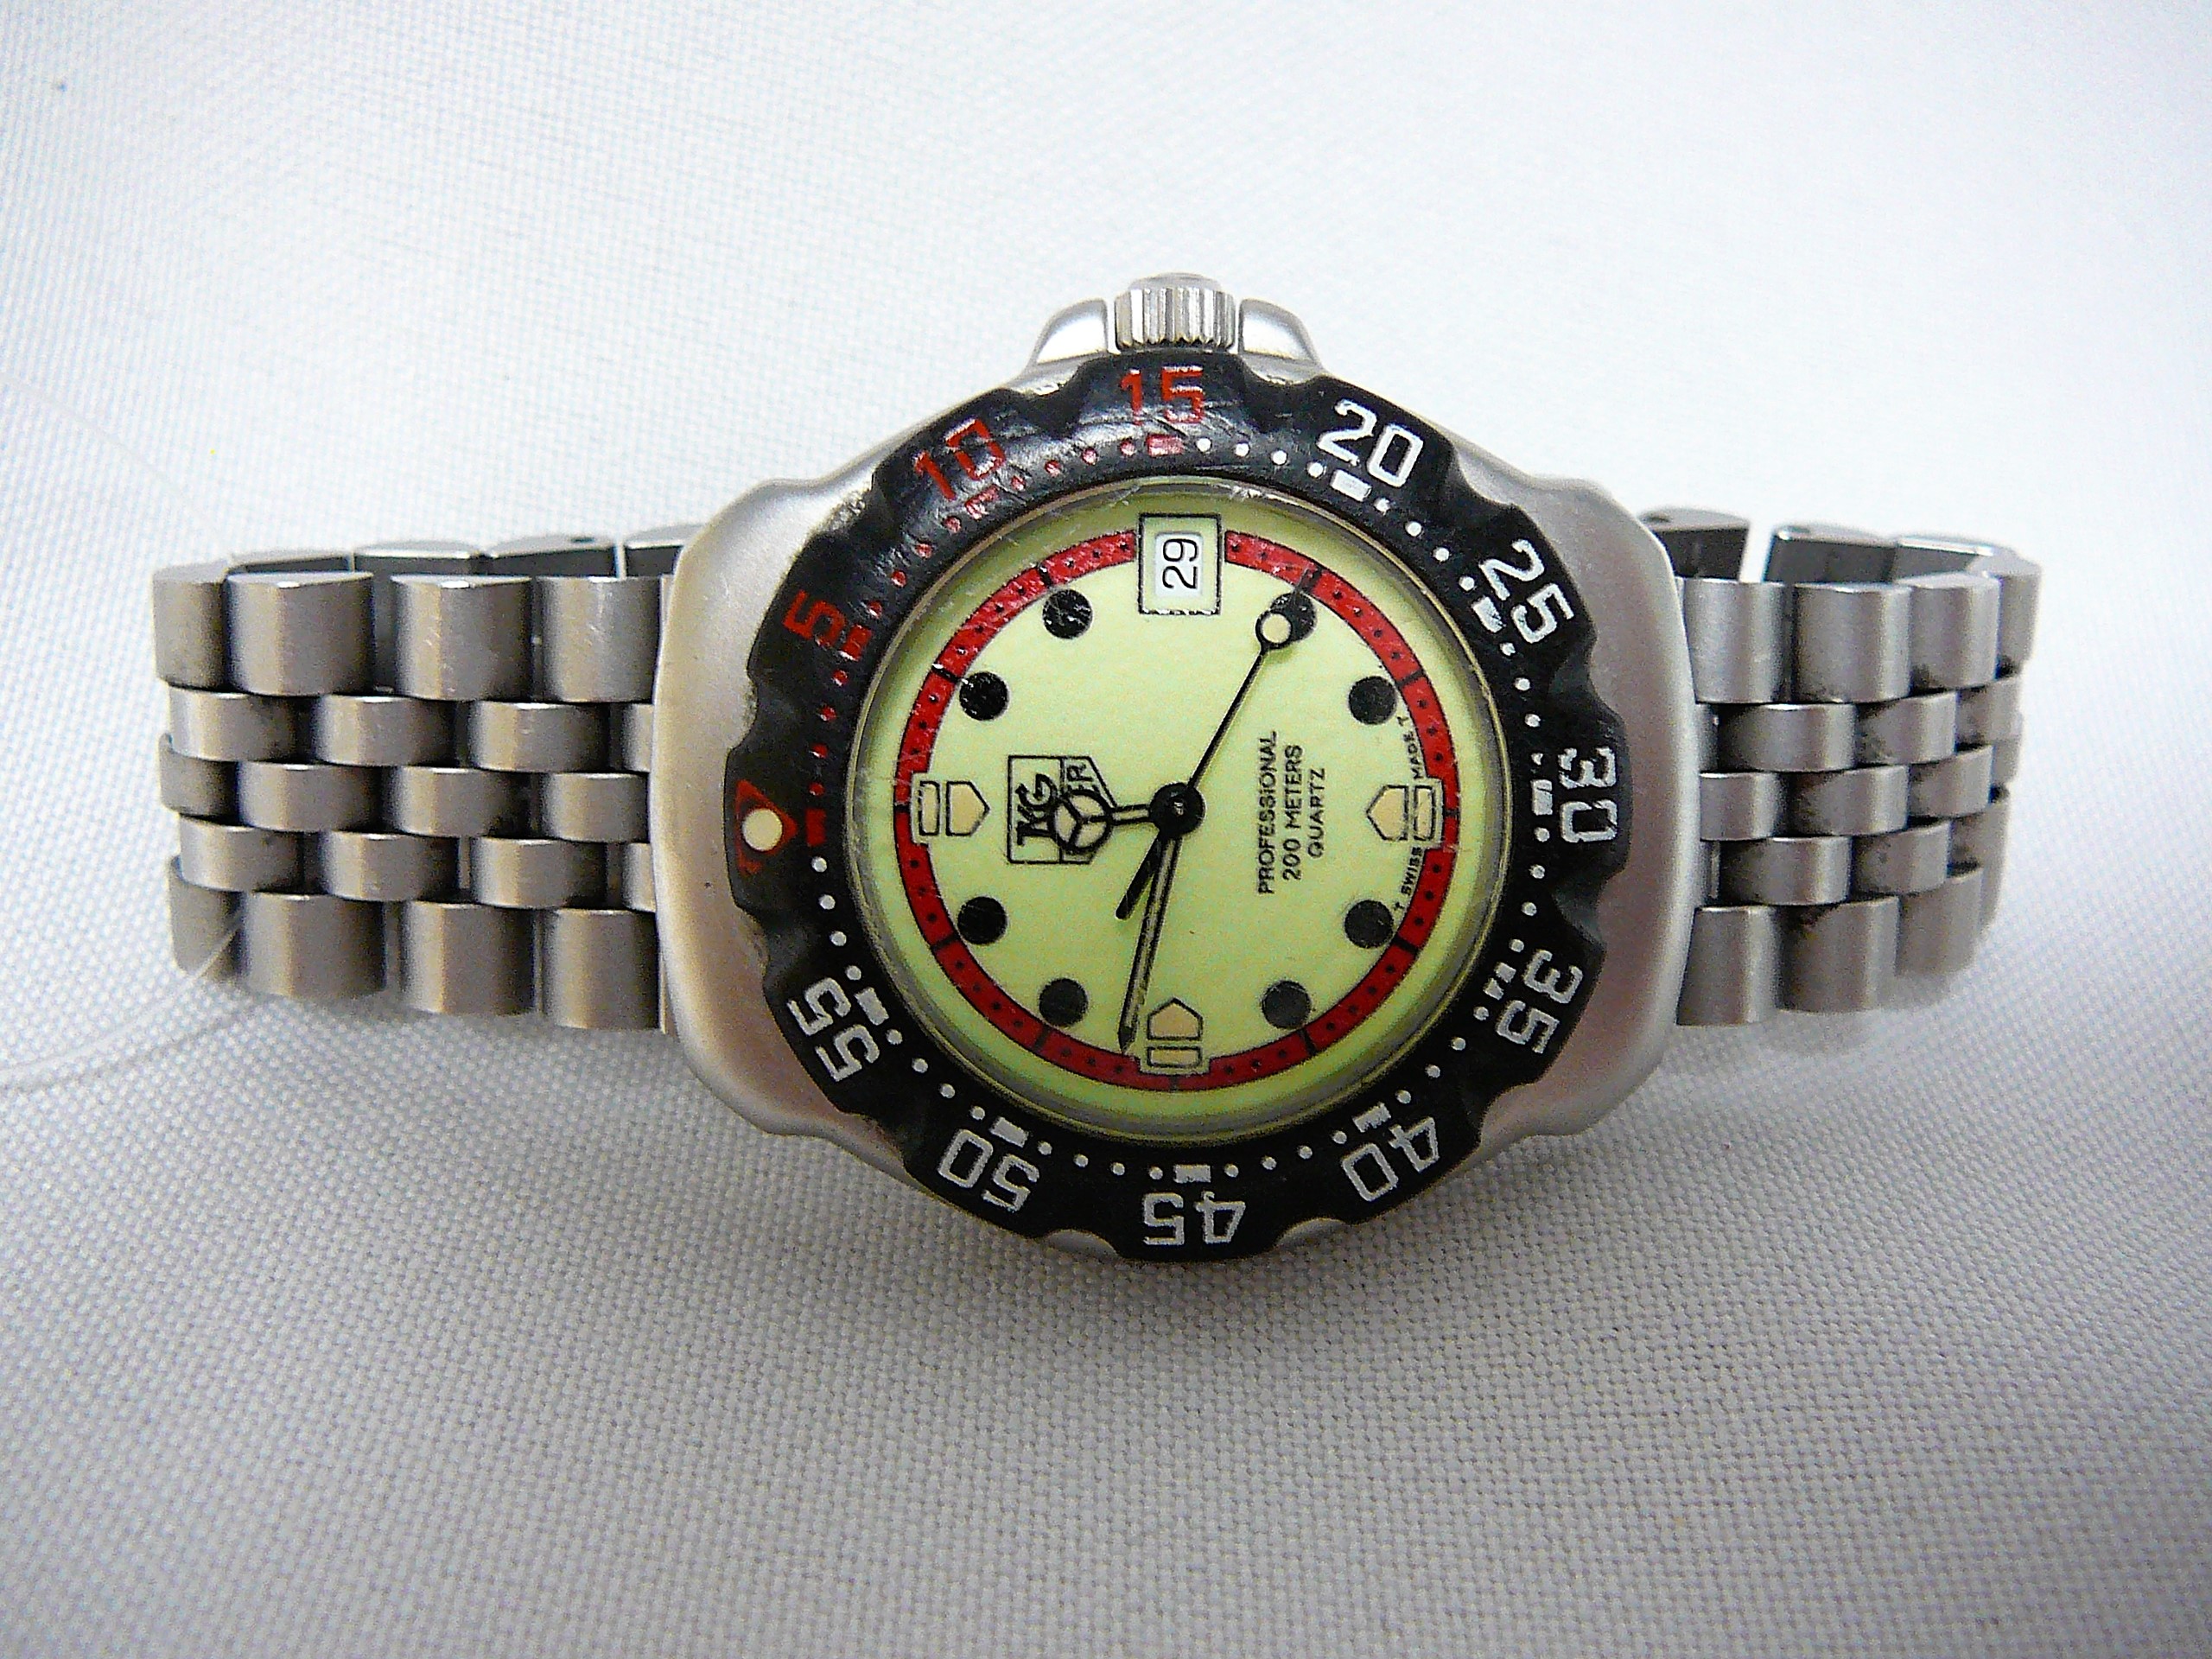 Gents Tag Heuer wrist watch - Image 4 of 4